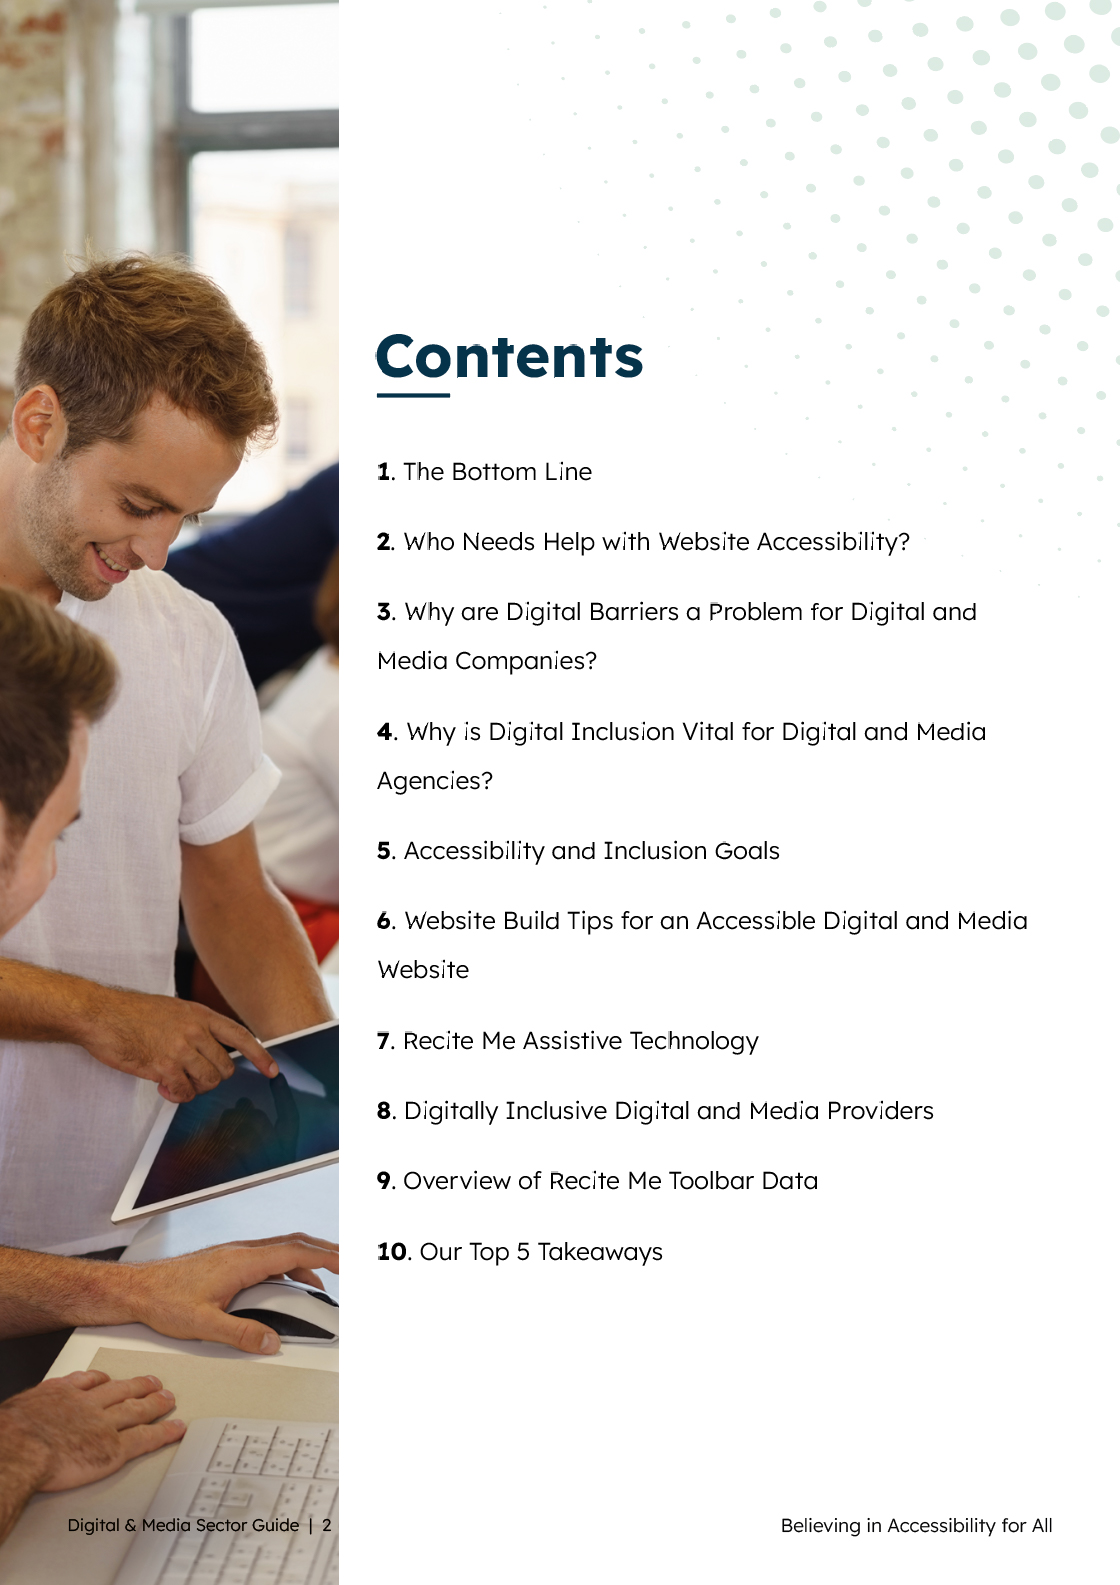 digital & media accessibility guide contents page